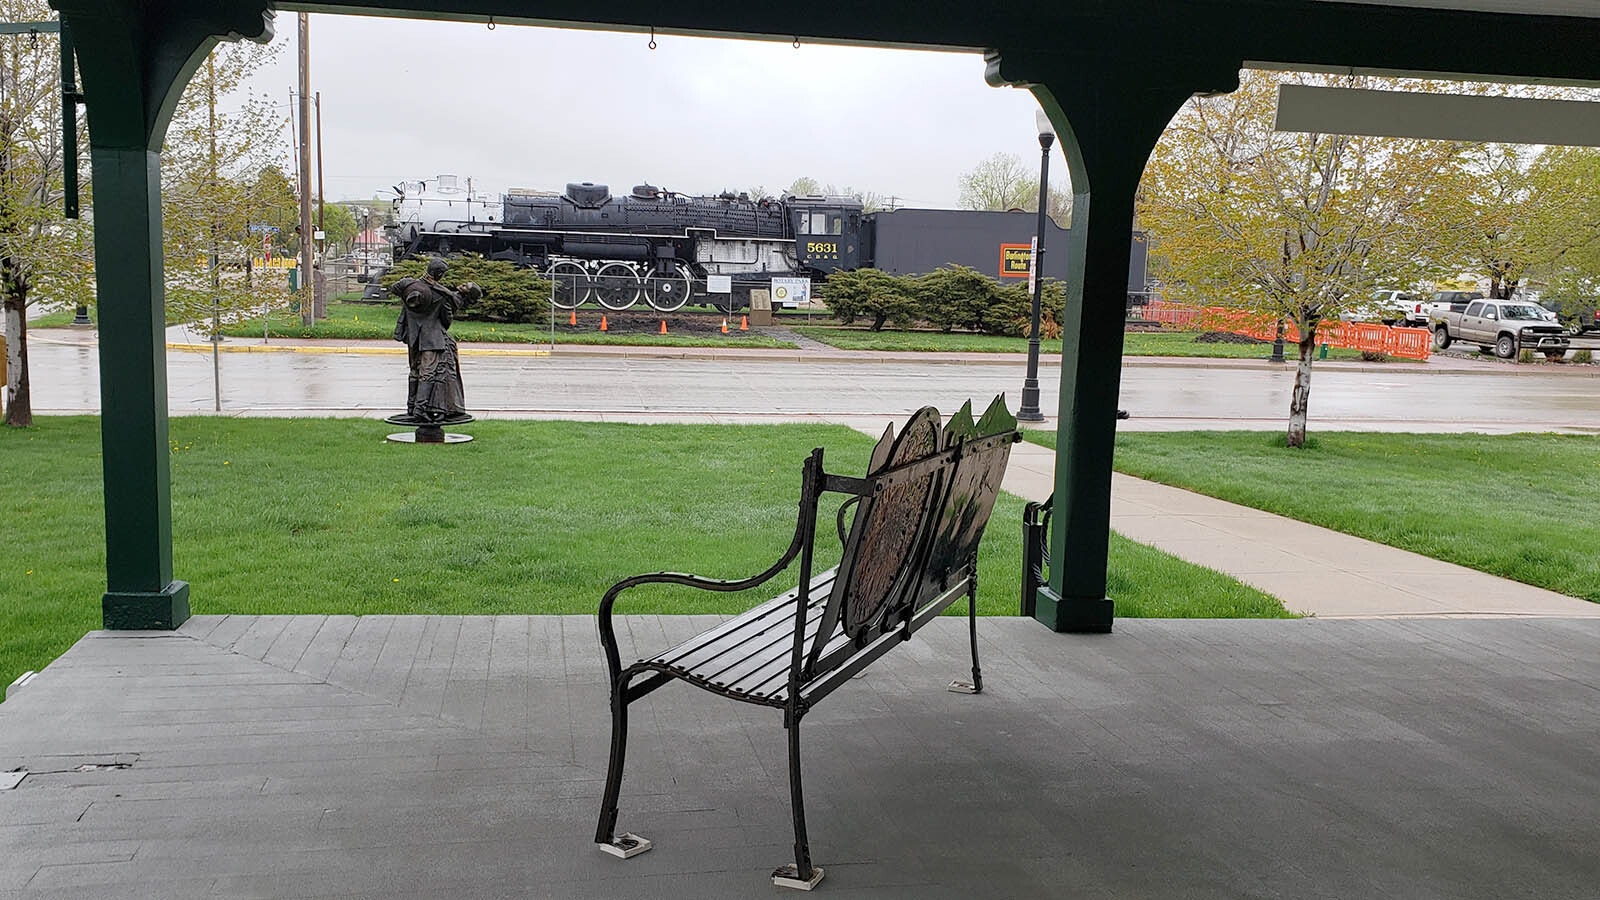 A bench looks out on the rest of Sheridan and a nearby locomotive.